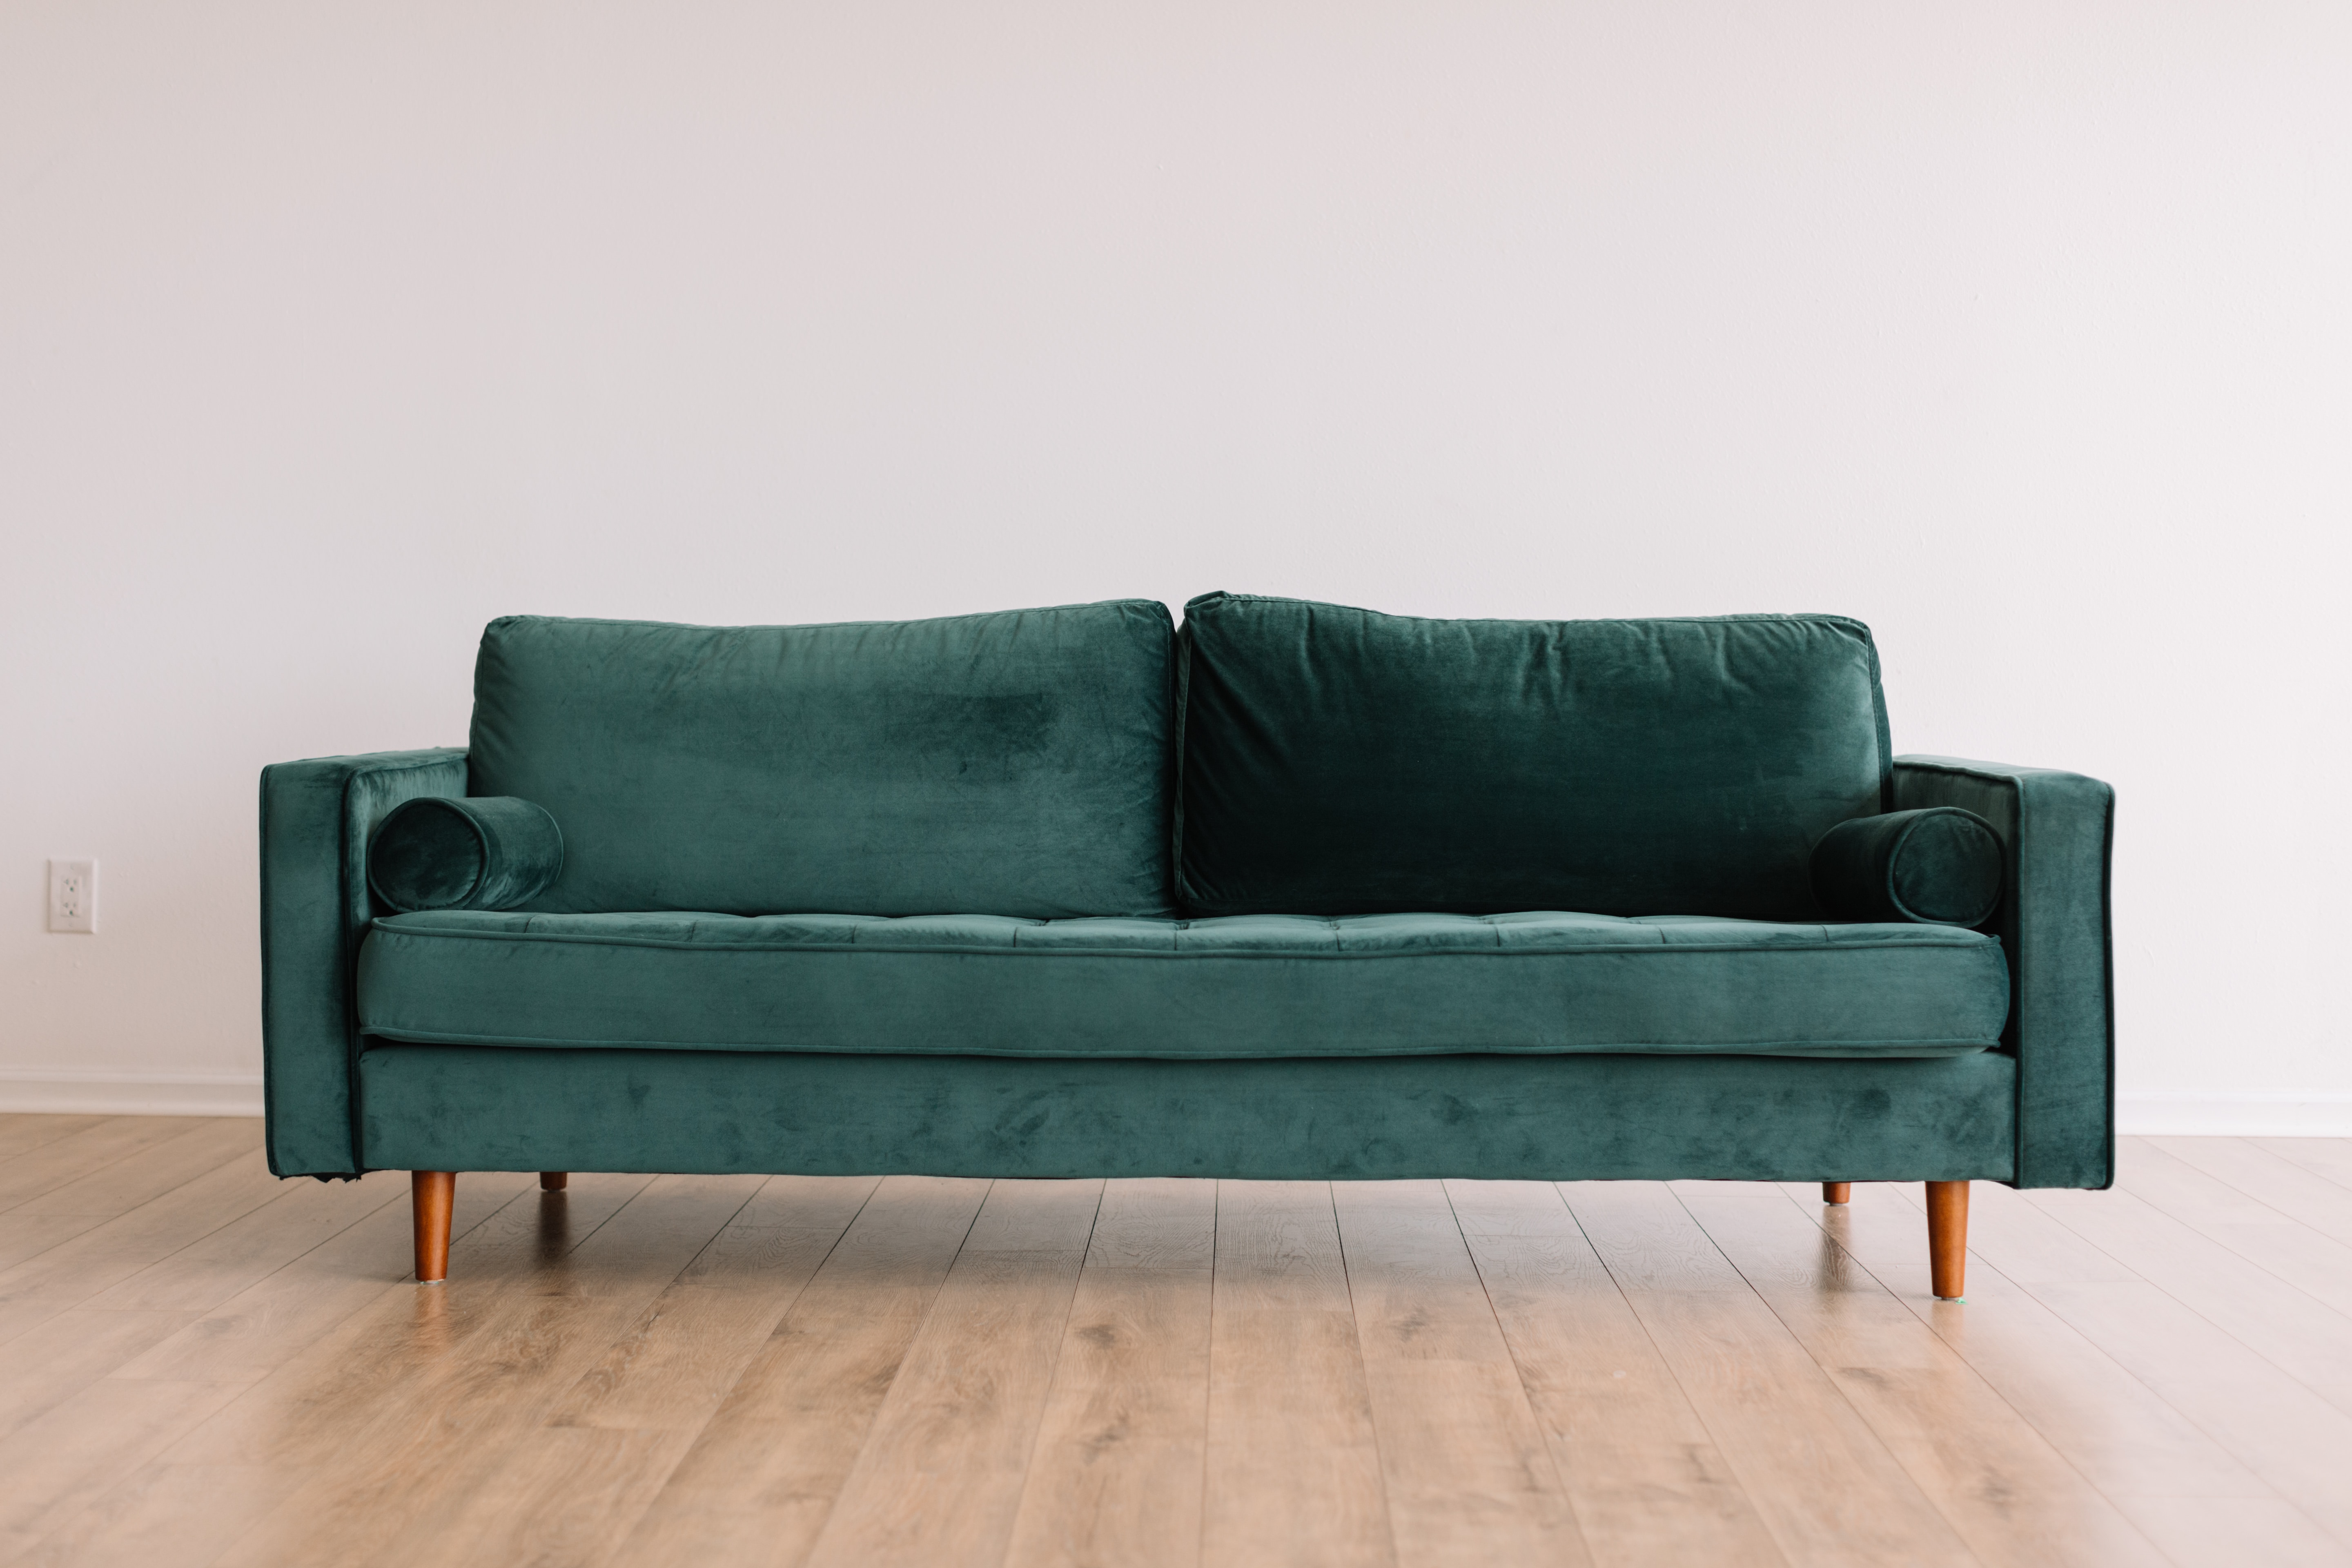 6 Better (And Earth-Friendlier) Alternatives To Throwing Away Your Old Sofa